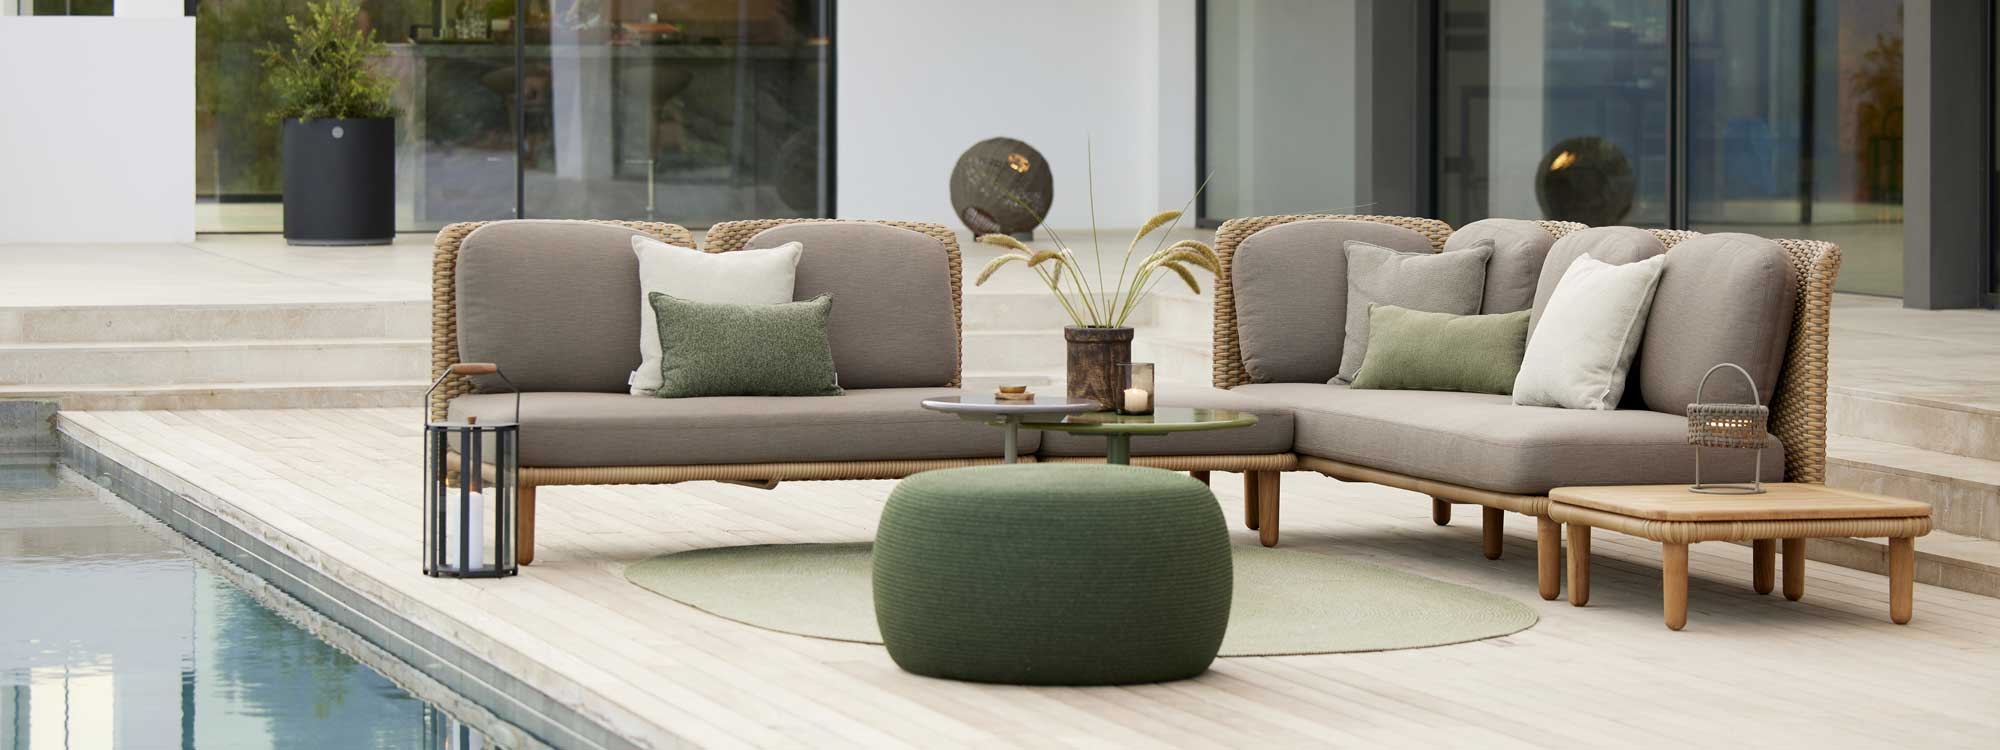 Image of Arch contemporary cane garden corner sofa, together with circle pouf and Glaze low tables by Cane-line, on wooden decked poolside